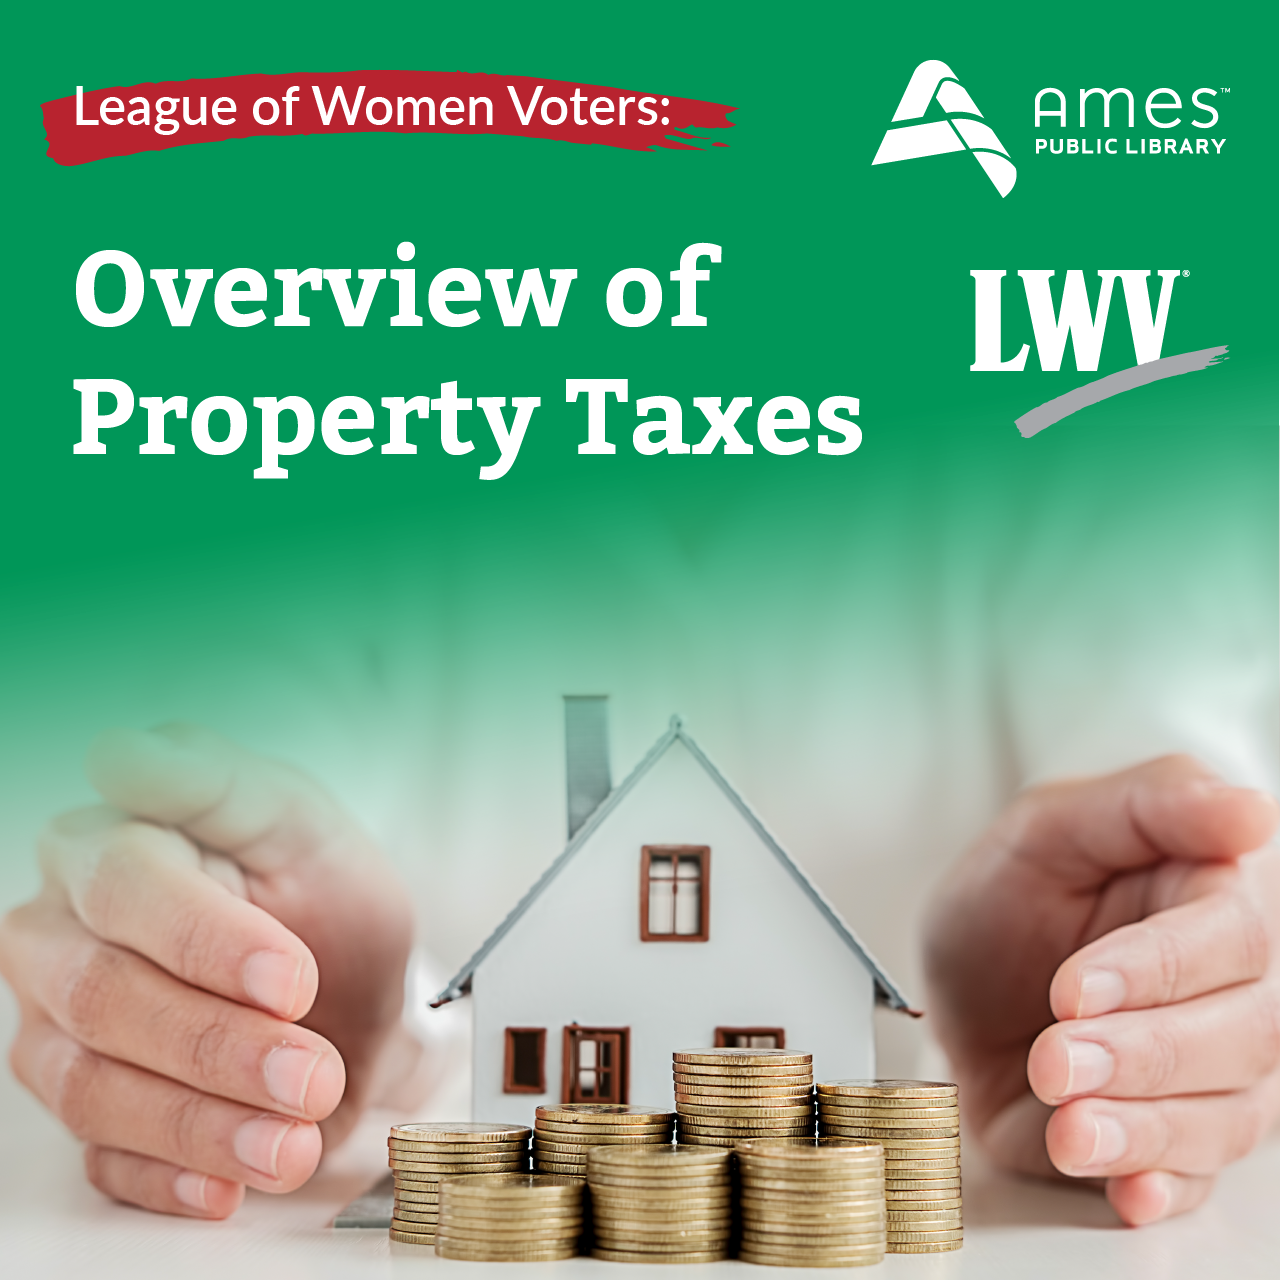 Overview of Property Taxes